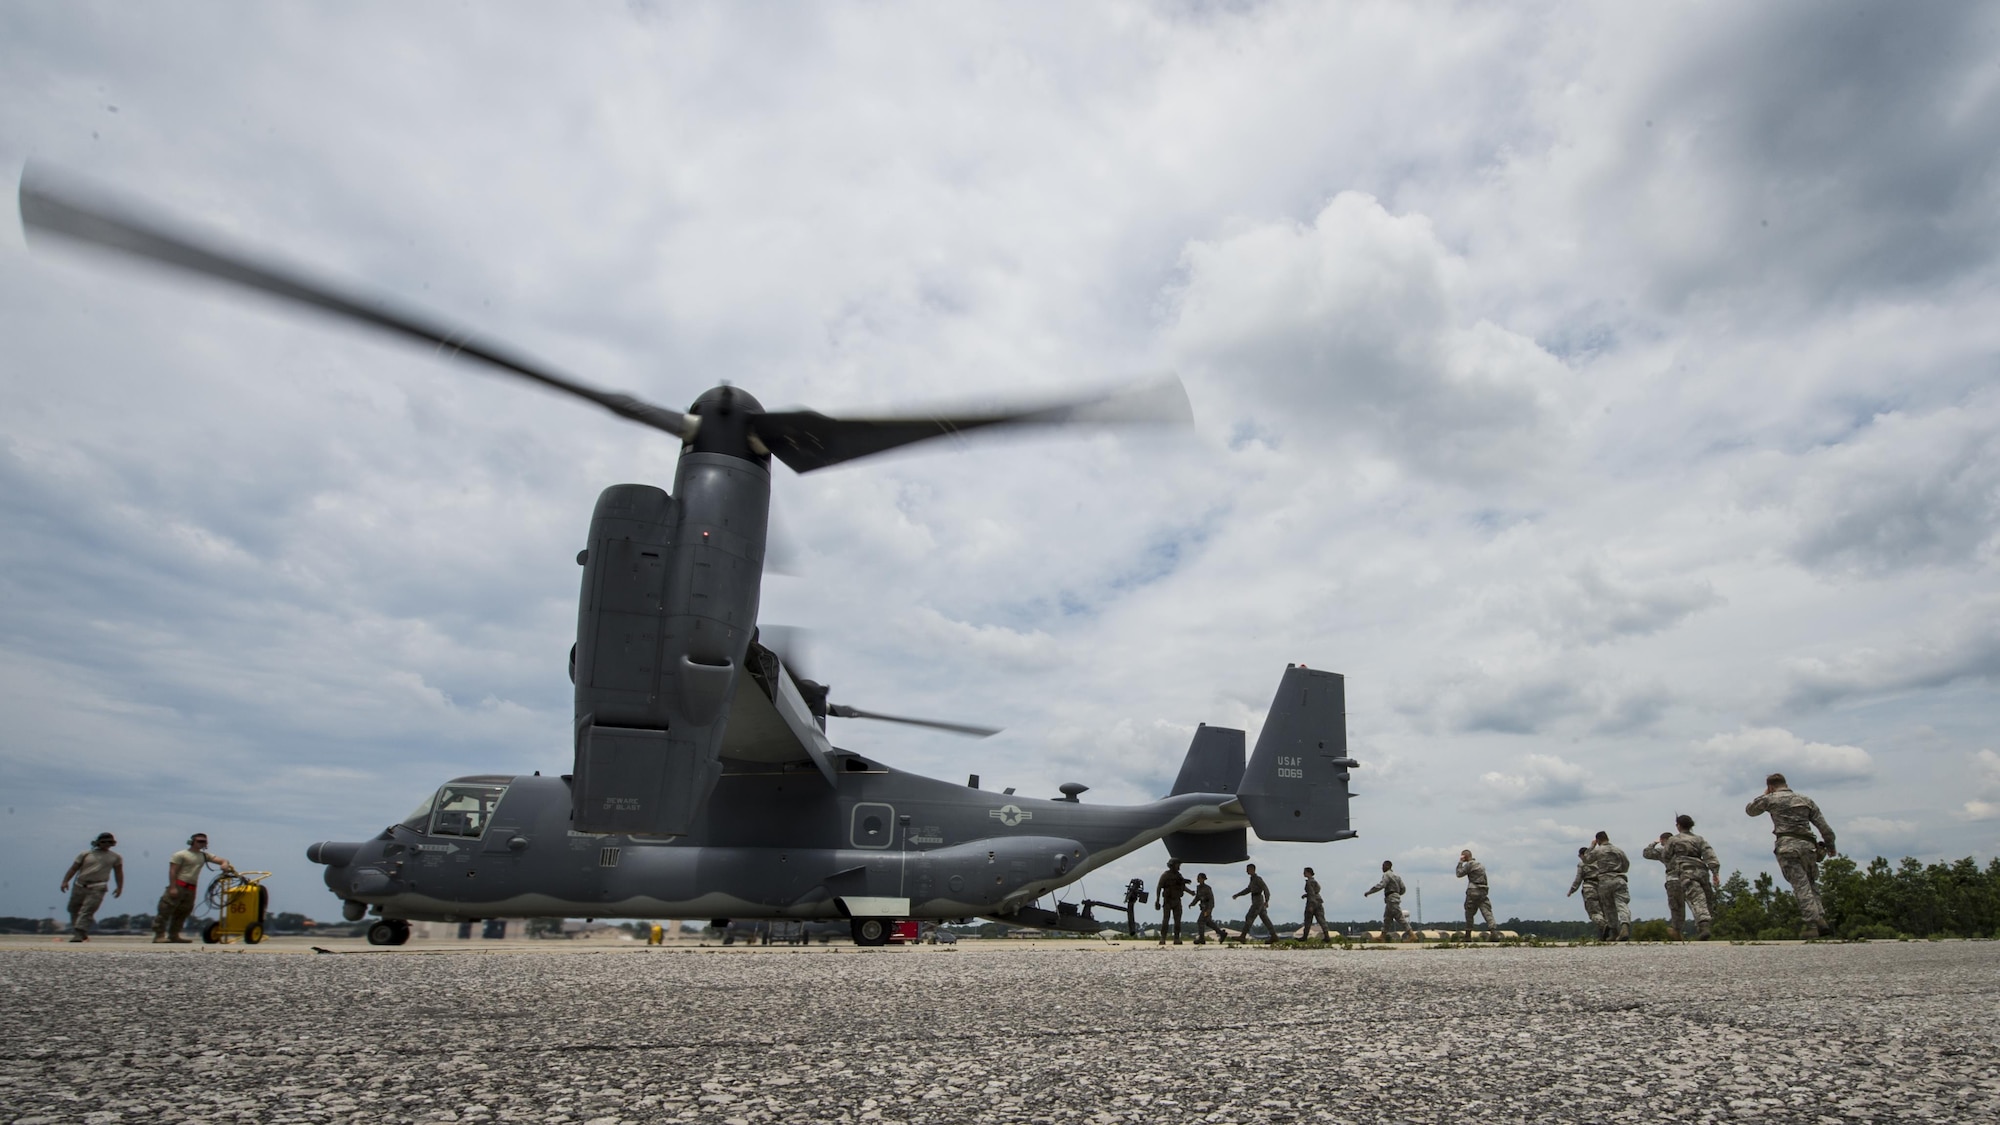 Junior ROTC cadets board an 8th Special Operations Squadron CV-22 Osprey tiltrotor aircraft at Hurlburt Field, Fla., June 27, 2017. More than 55 JROTC cadets from nearby high schools flew in a CV-22 and a 15th SOS MC-130H Combat Talon II as part of a JROTC familiarization flight. (U.S. Air Force photo by Airman 1st Class Joseph Pick)